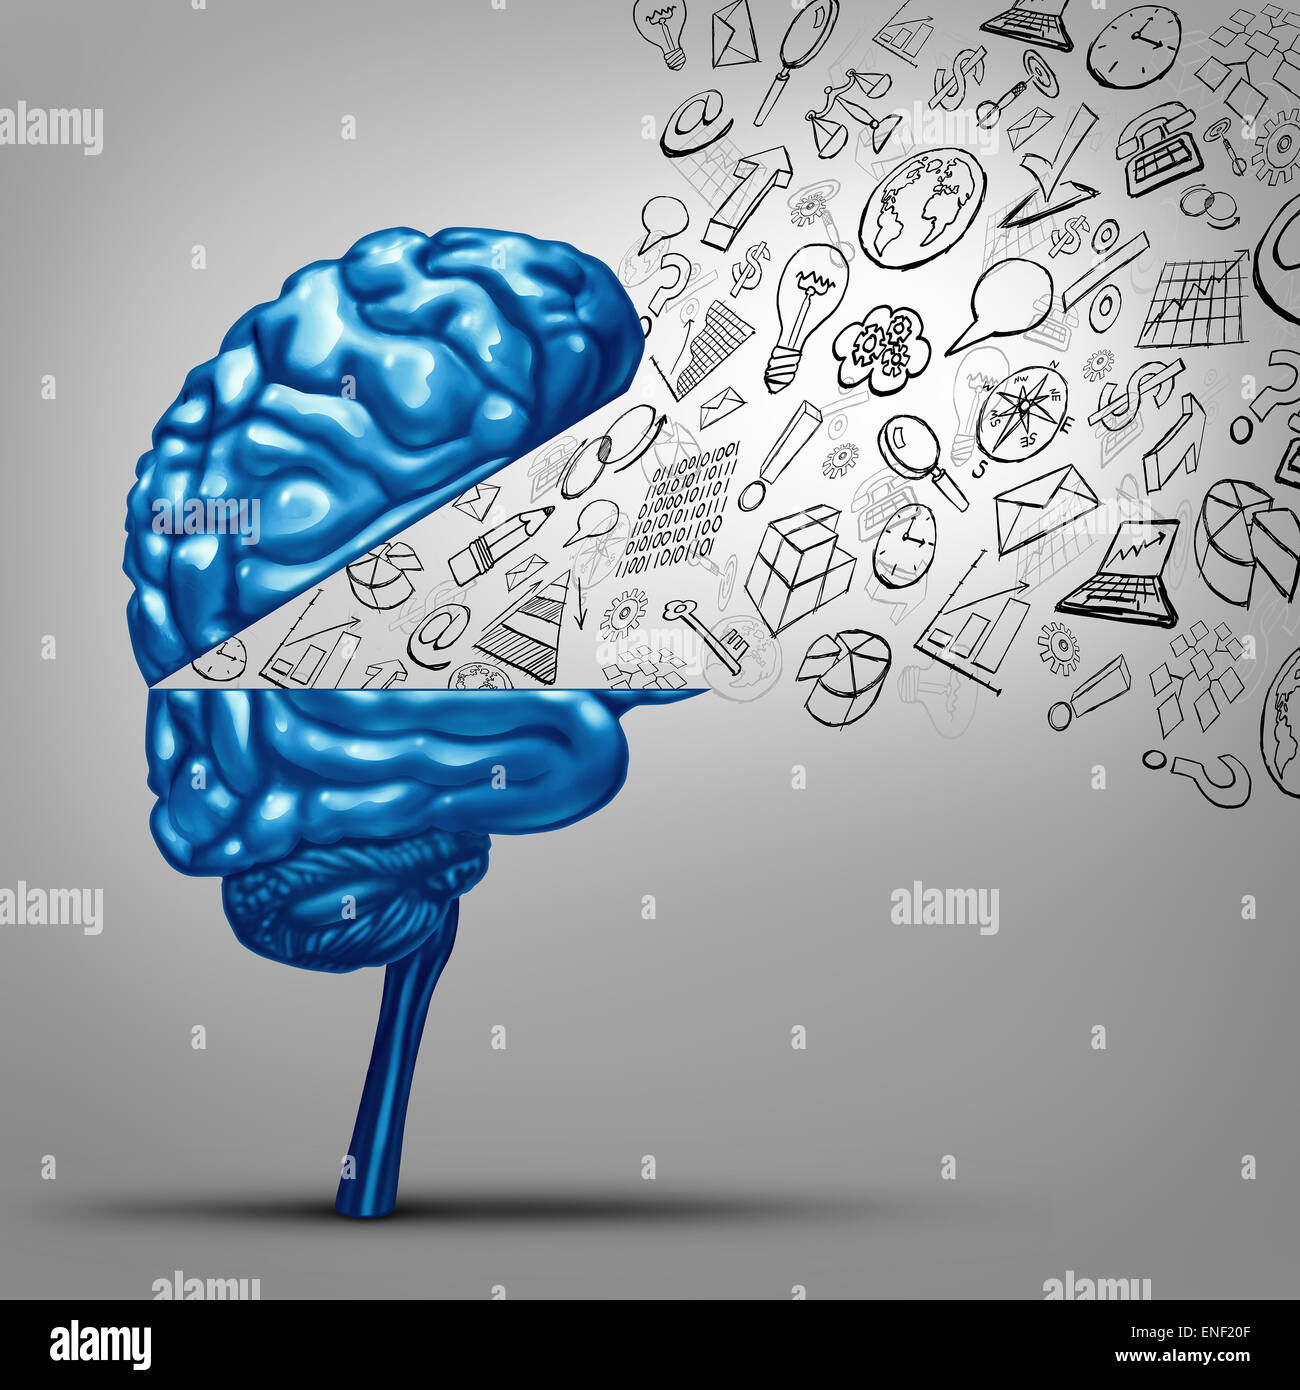 Business thoughts and financial vision concept as an open human brain with office icon symbols as charts graphs and objects as a metaphor for marketing success training and strategy communication. Stock Photo